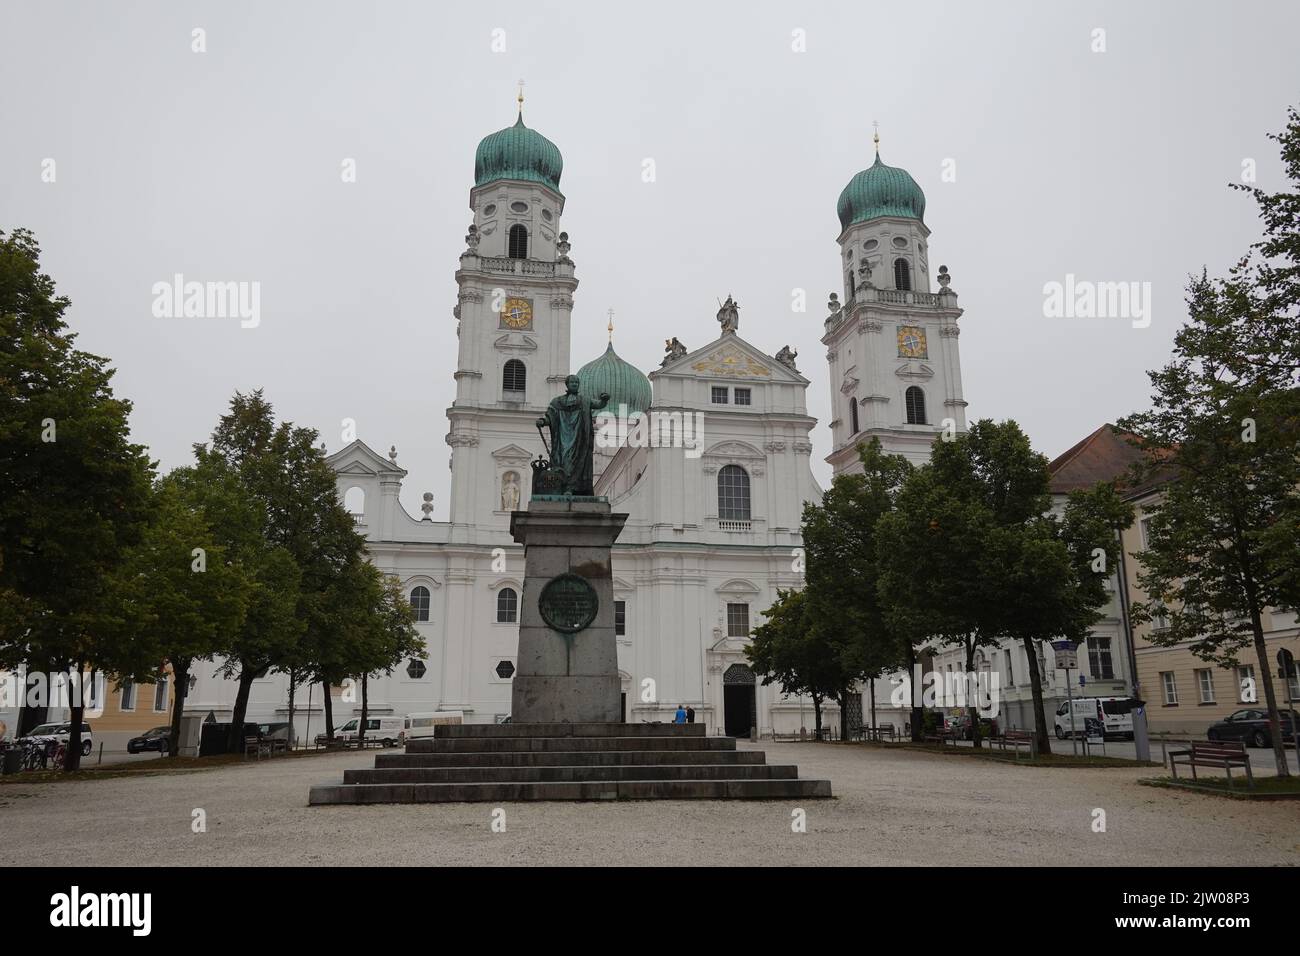 St Stephen's Cathedral, Passau, Germany Stock Photo